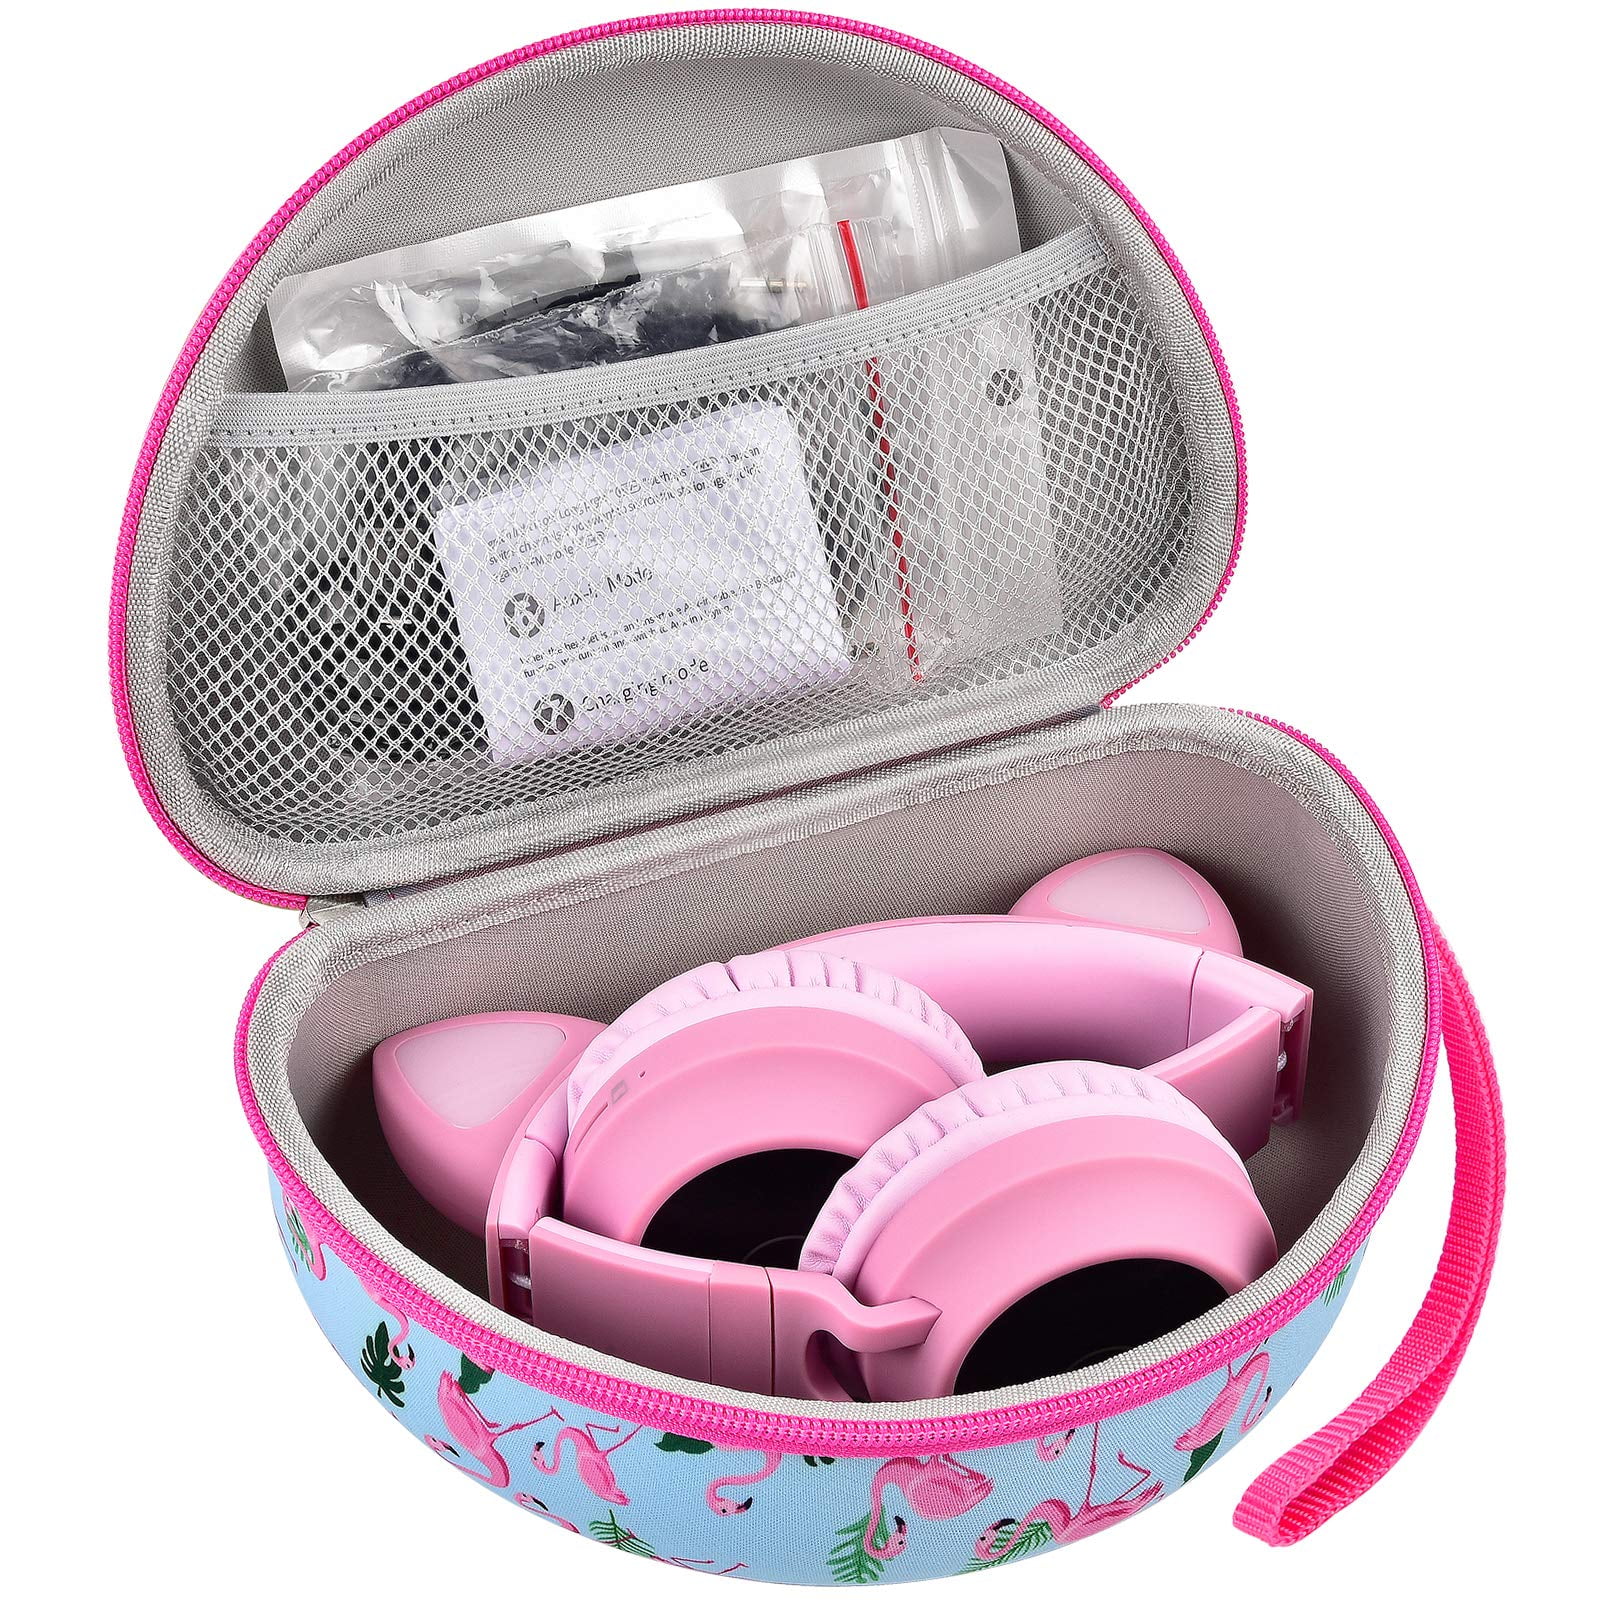 Headphone Case for Riwbox CT-7 Pink& Green 3.5mm Jack Ct-7s Cat iClever Ic-hs01 Mpow BH297B Wired and Picun Bluetooth Wireless Over-Ear Headphones